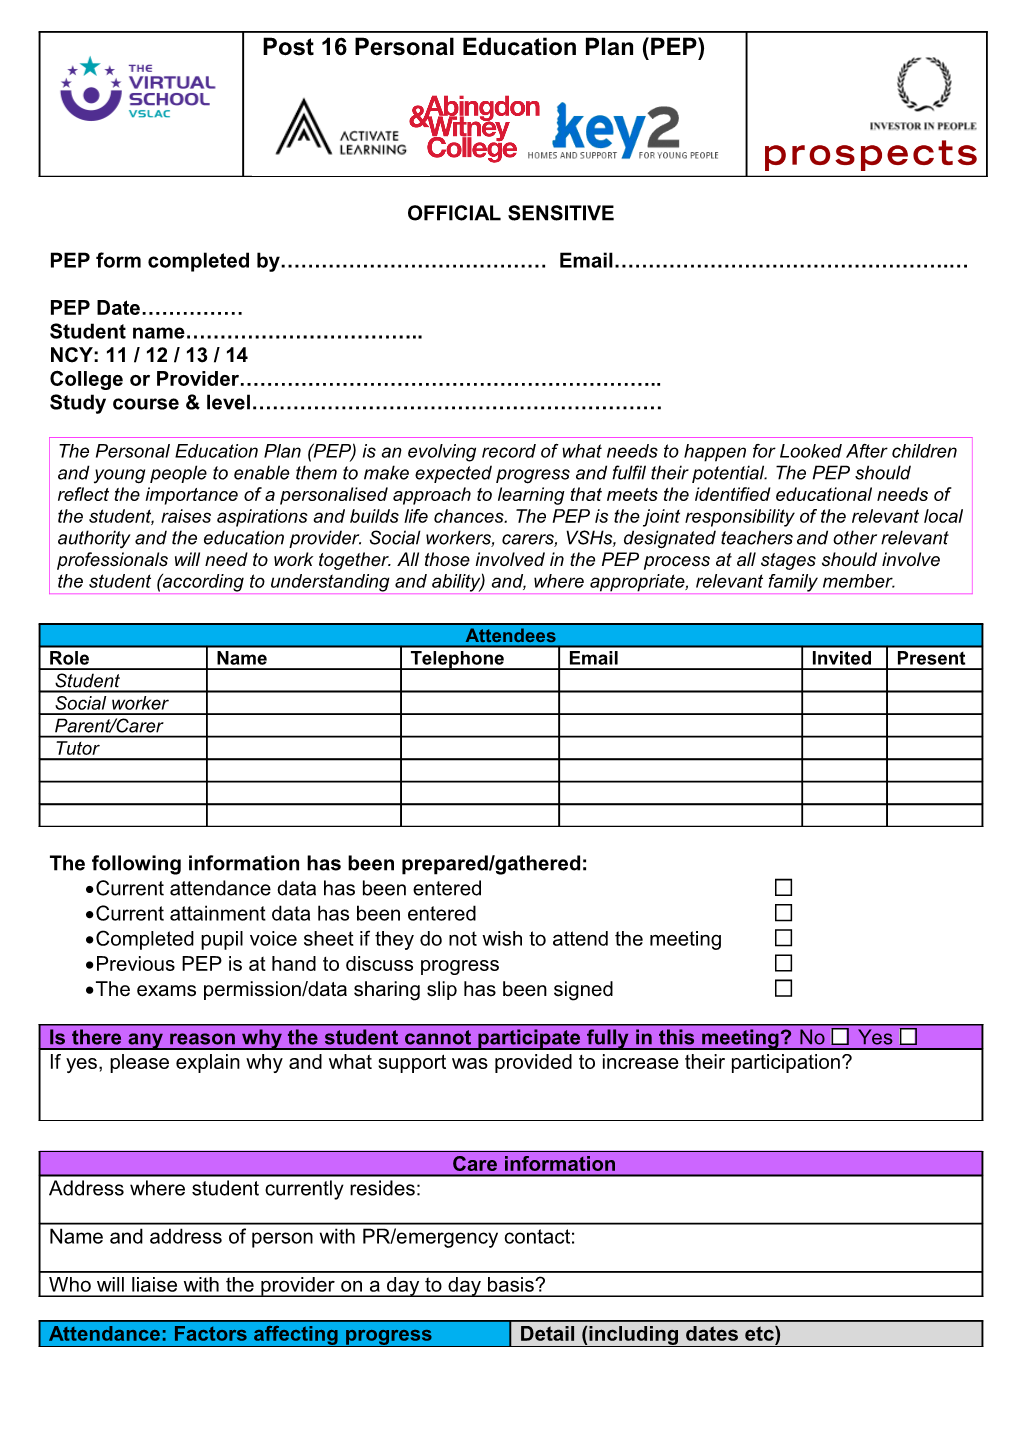 PEP Form Completed by Email